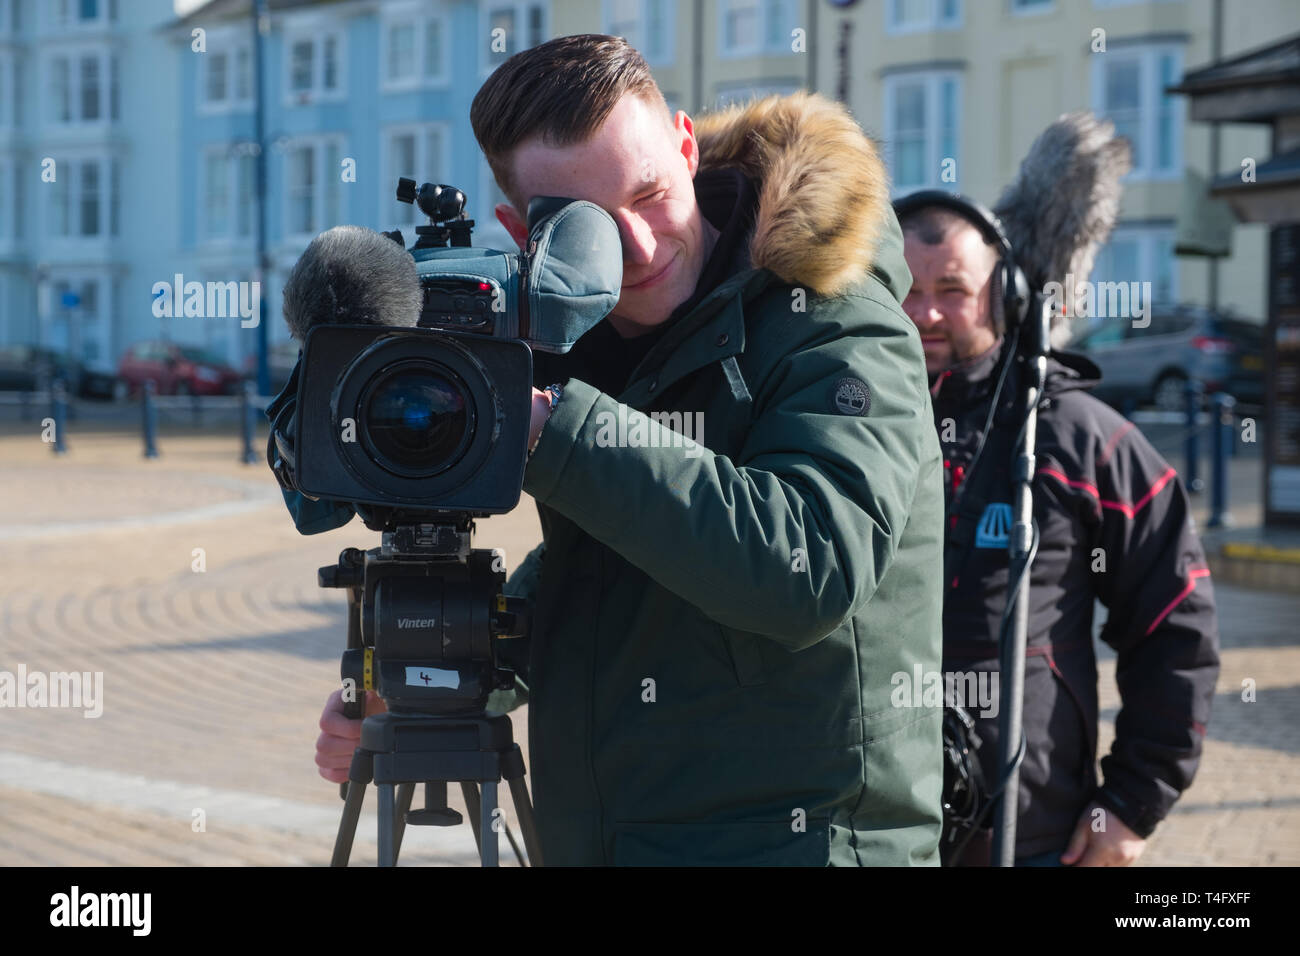 Media workers in the UK: A professional television crew  on location recording an item for broadcast, with the video camerman pointing his lens directly at the subject. UK Stock Photo